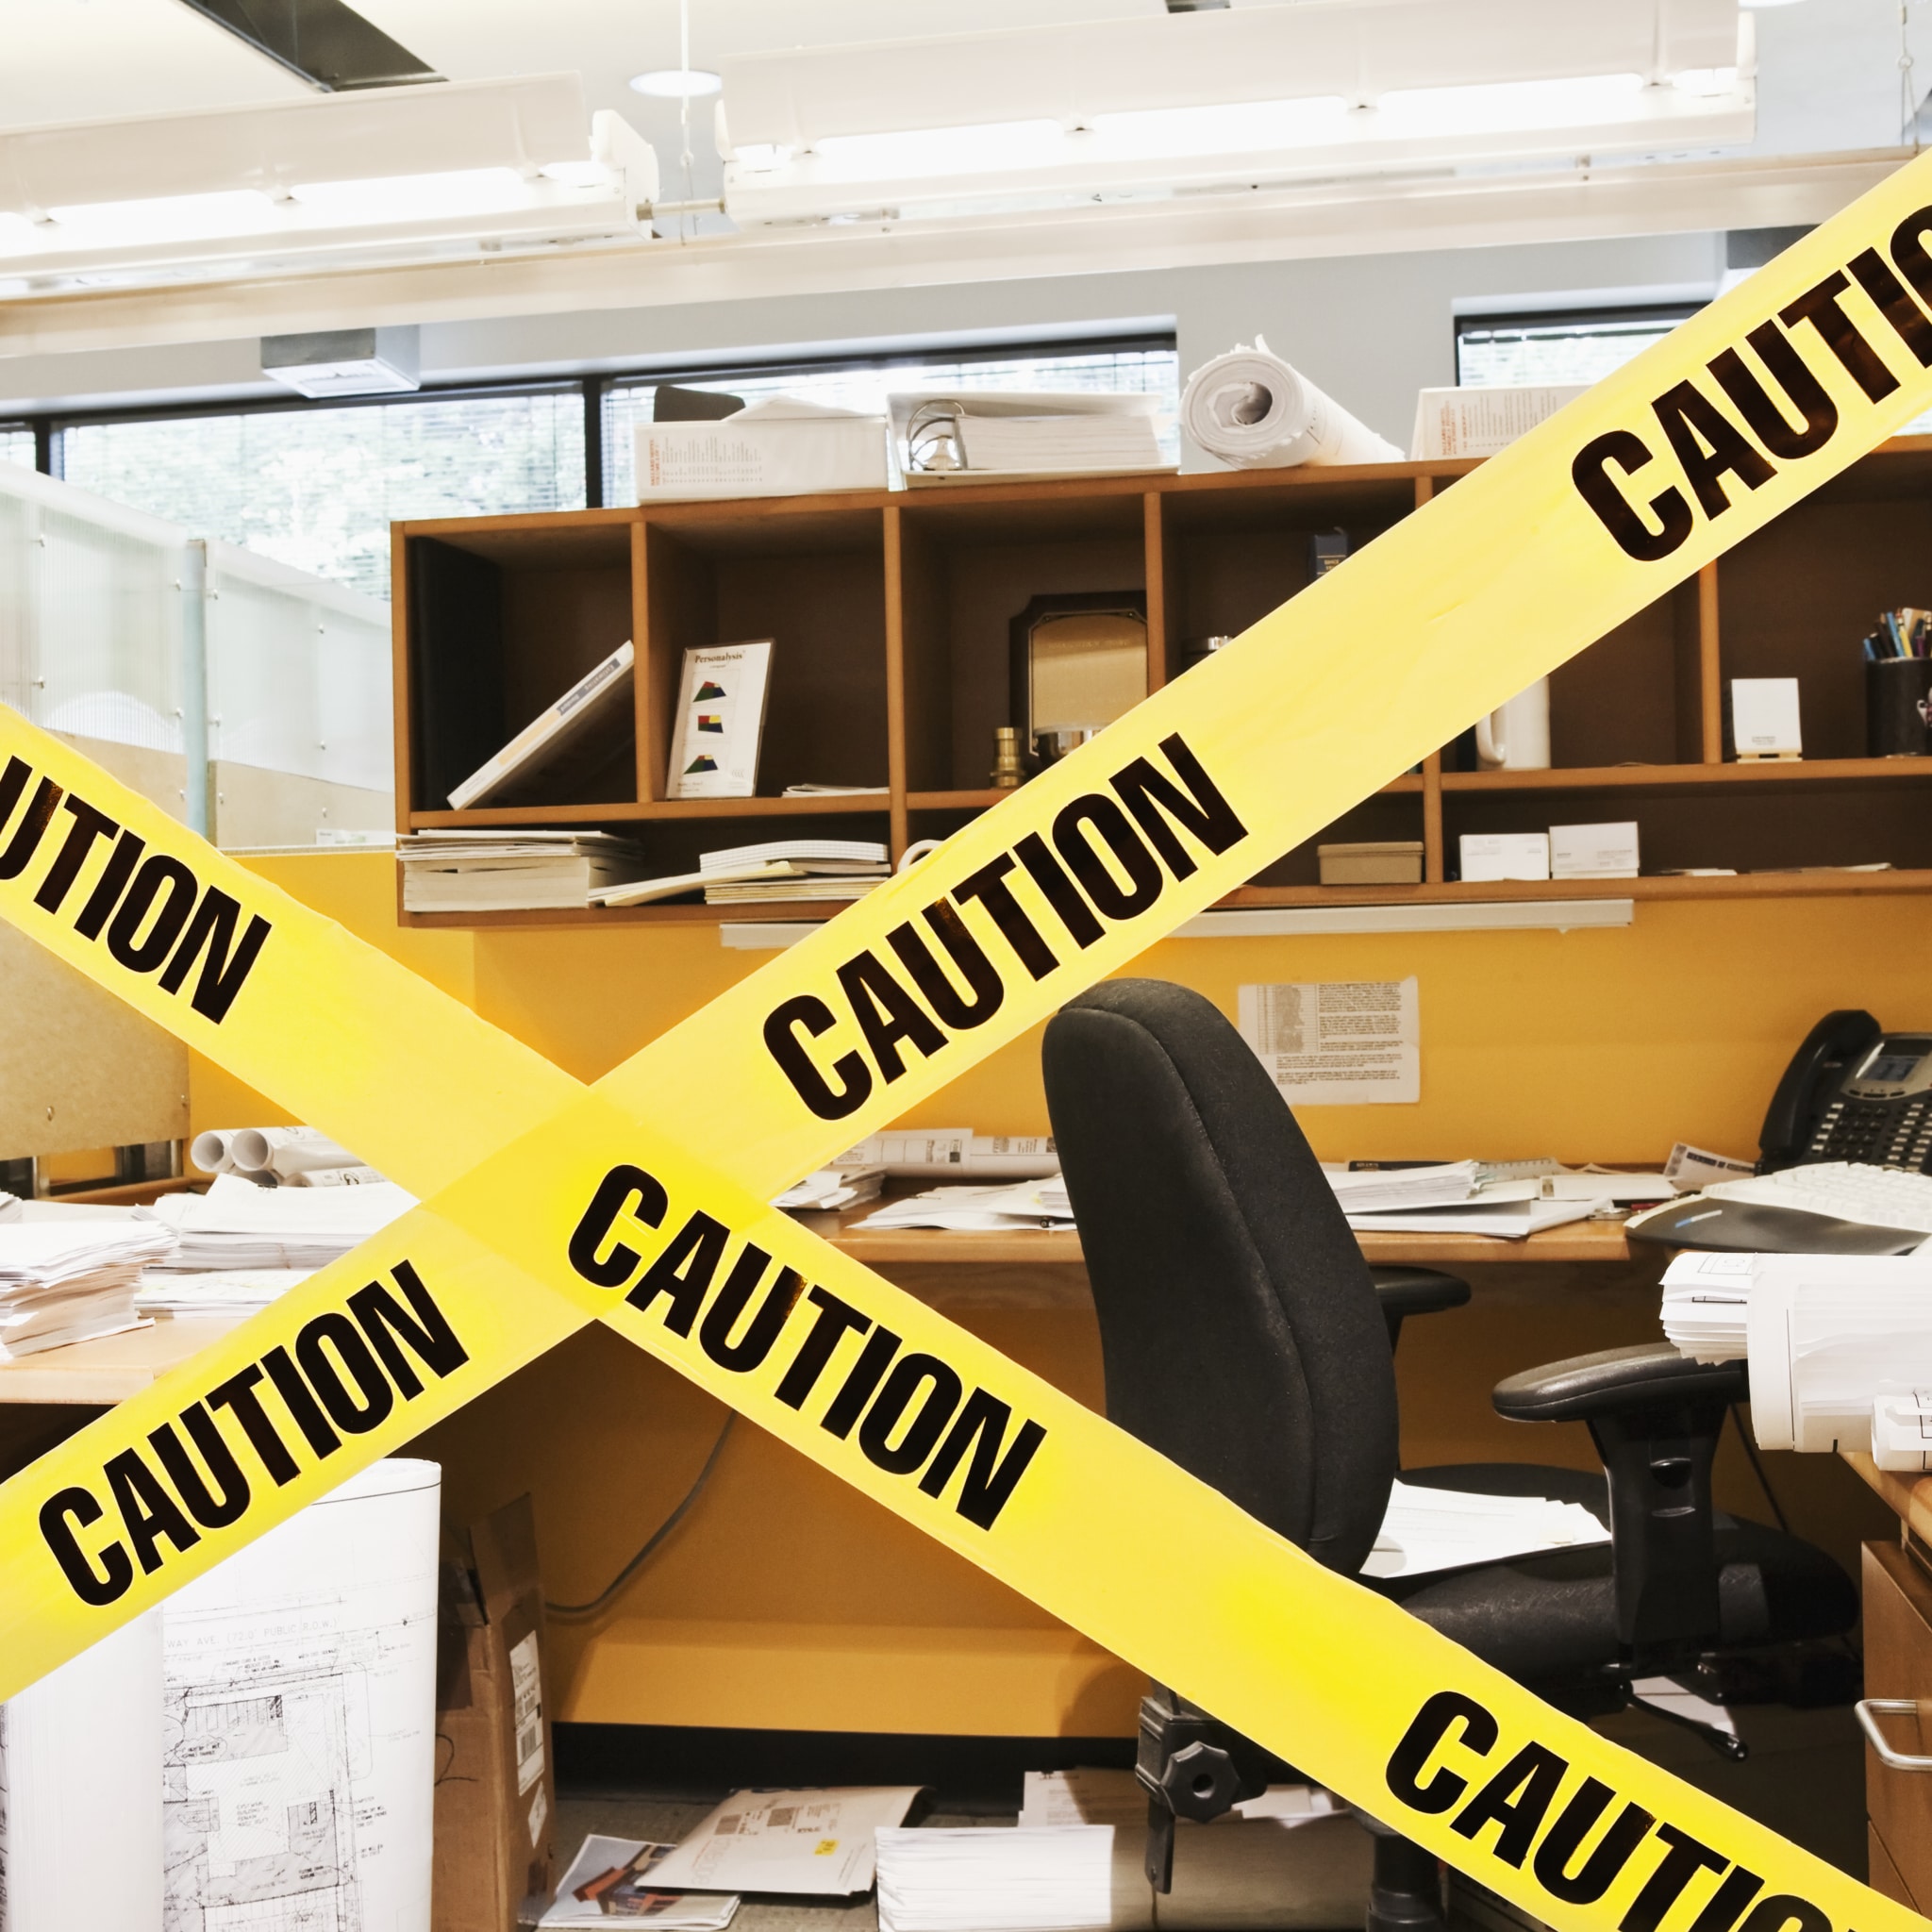 Caution tape in front of office cubicle